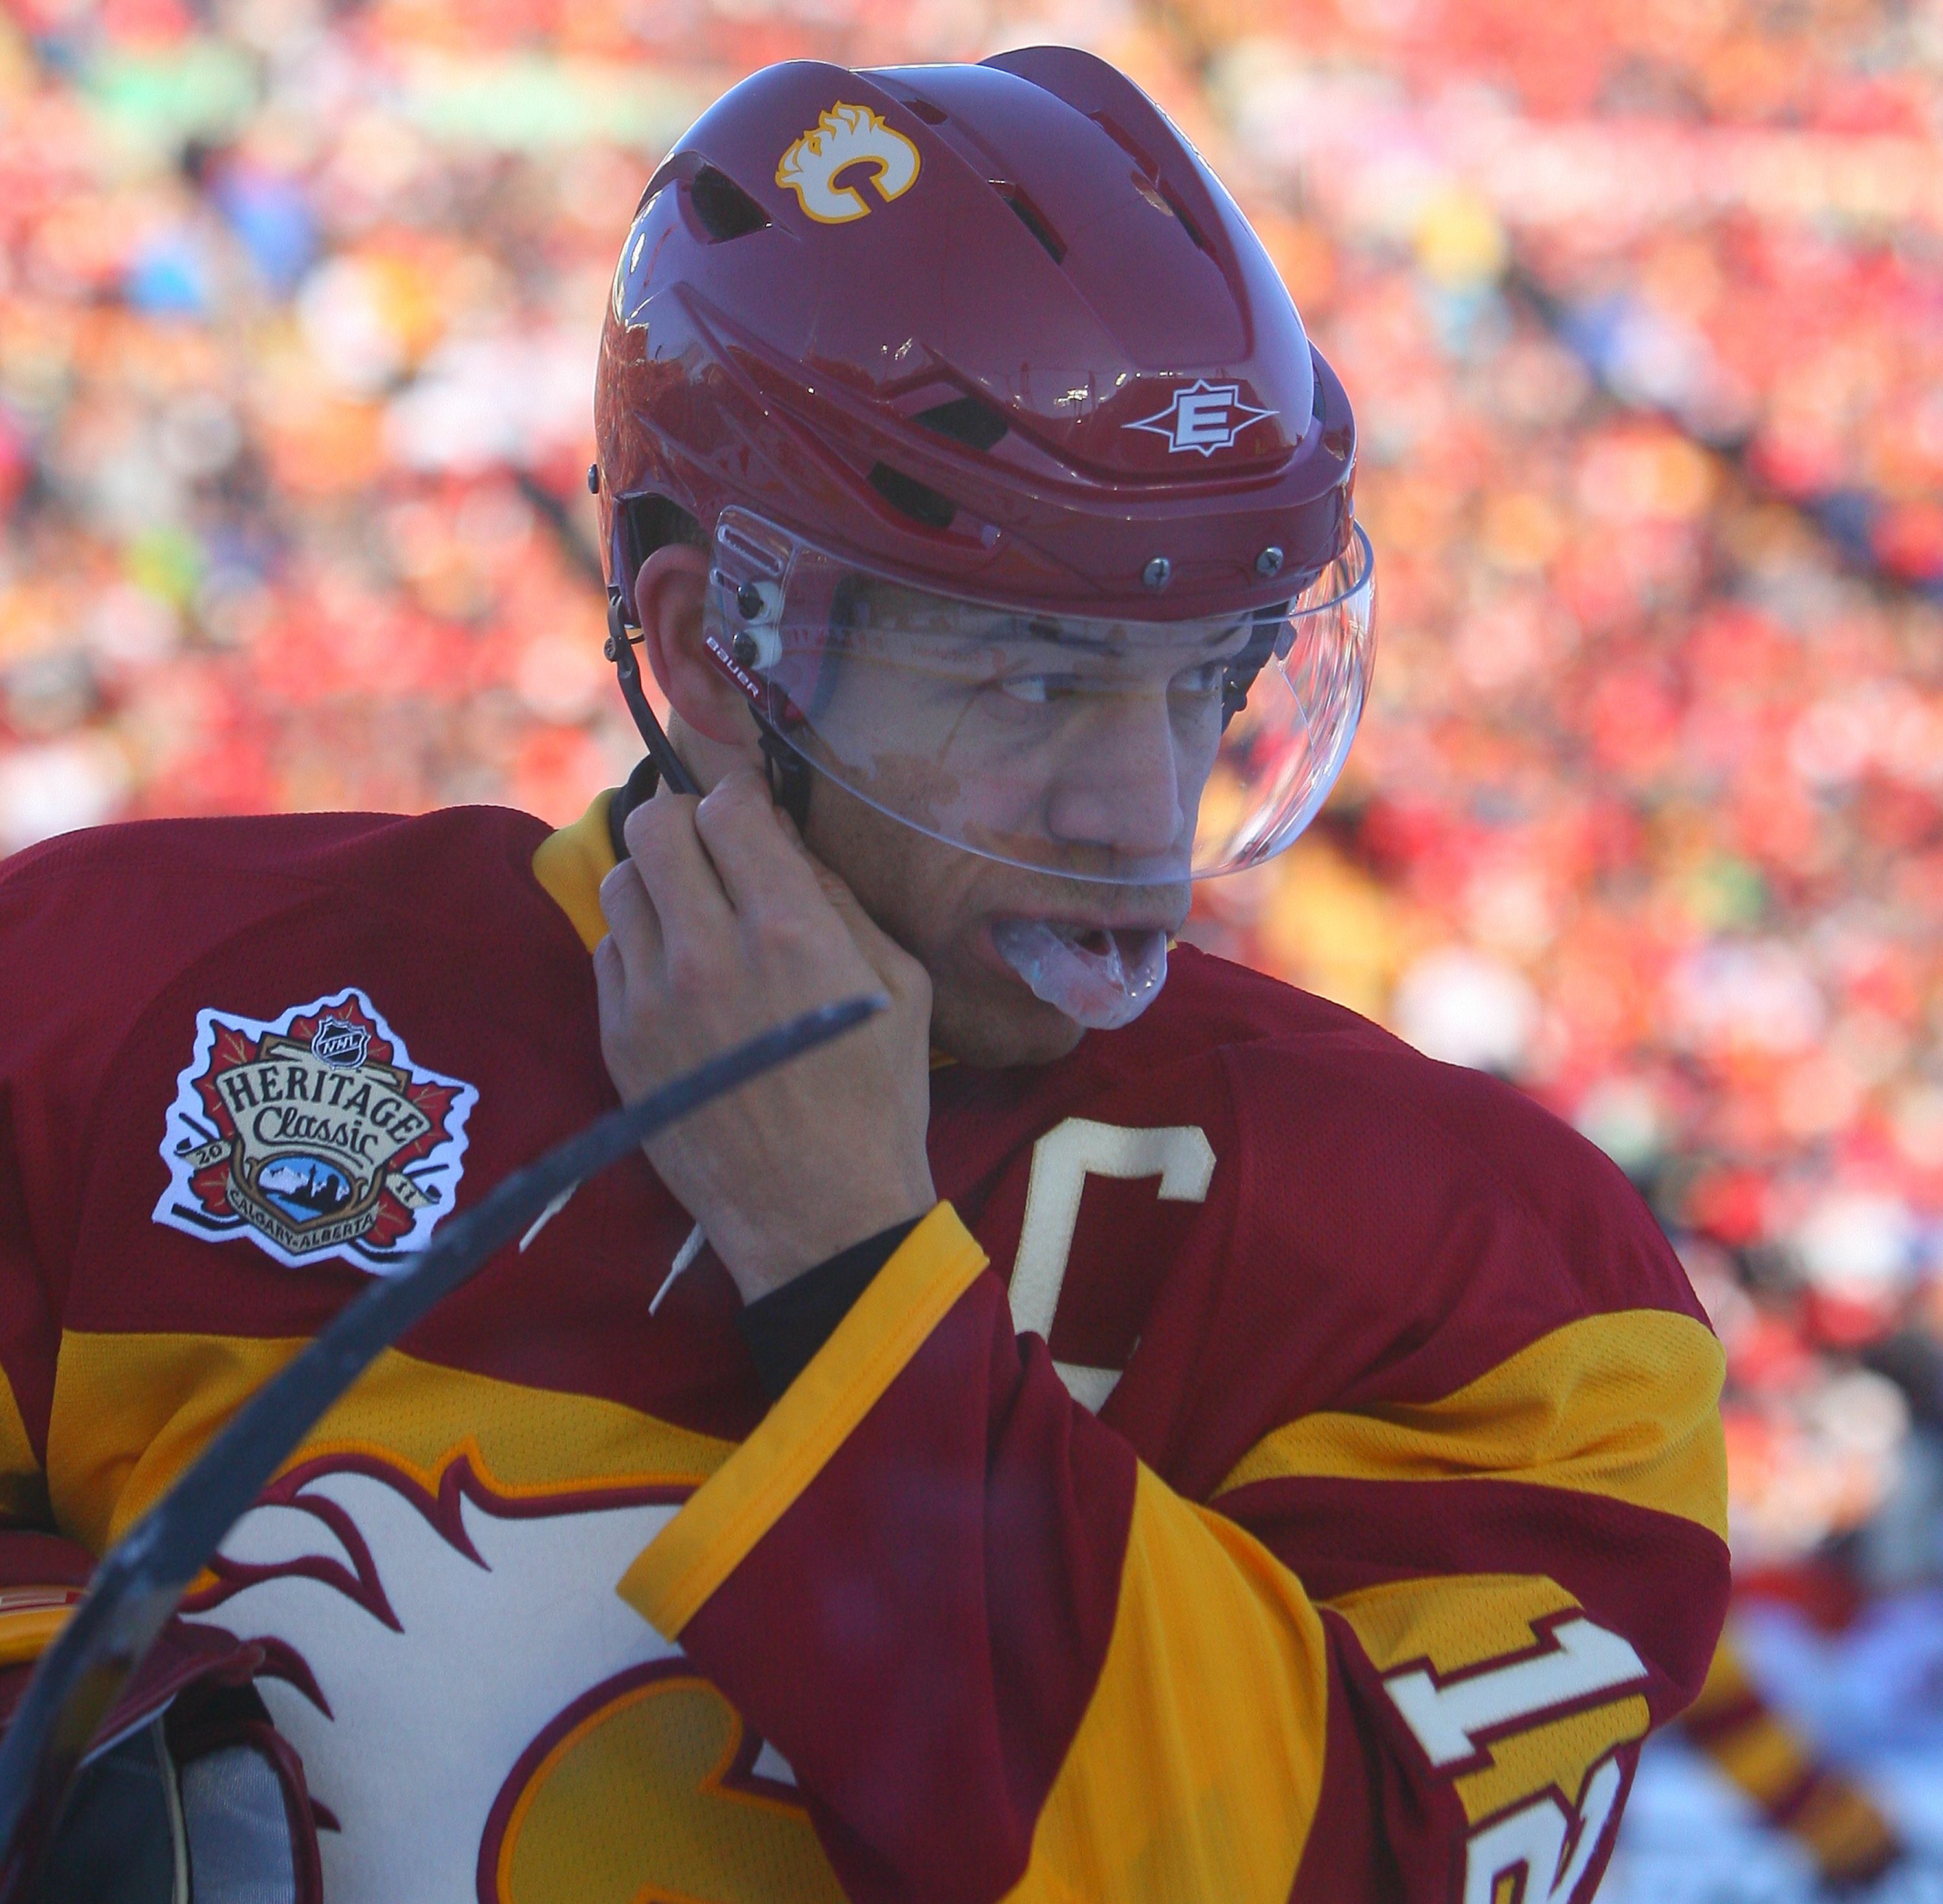 Jarome Iginla returning to Calgary to announce retirement from NHL